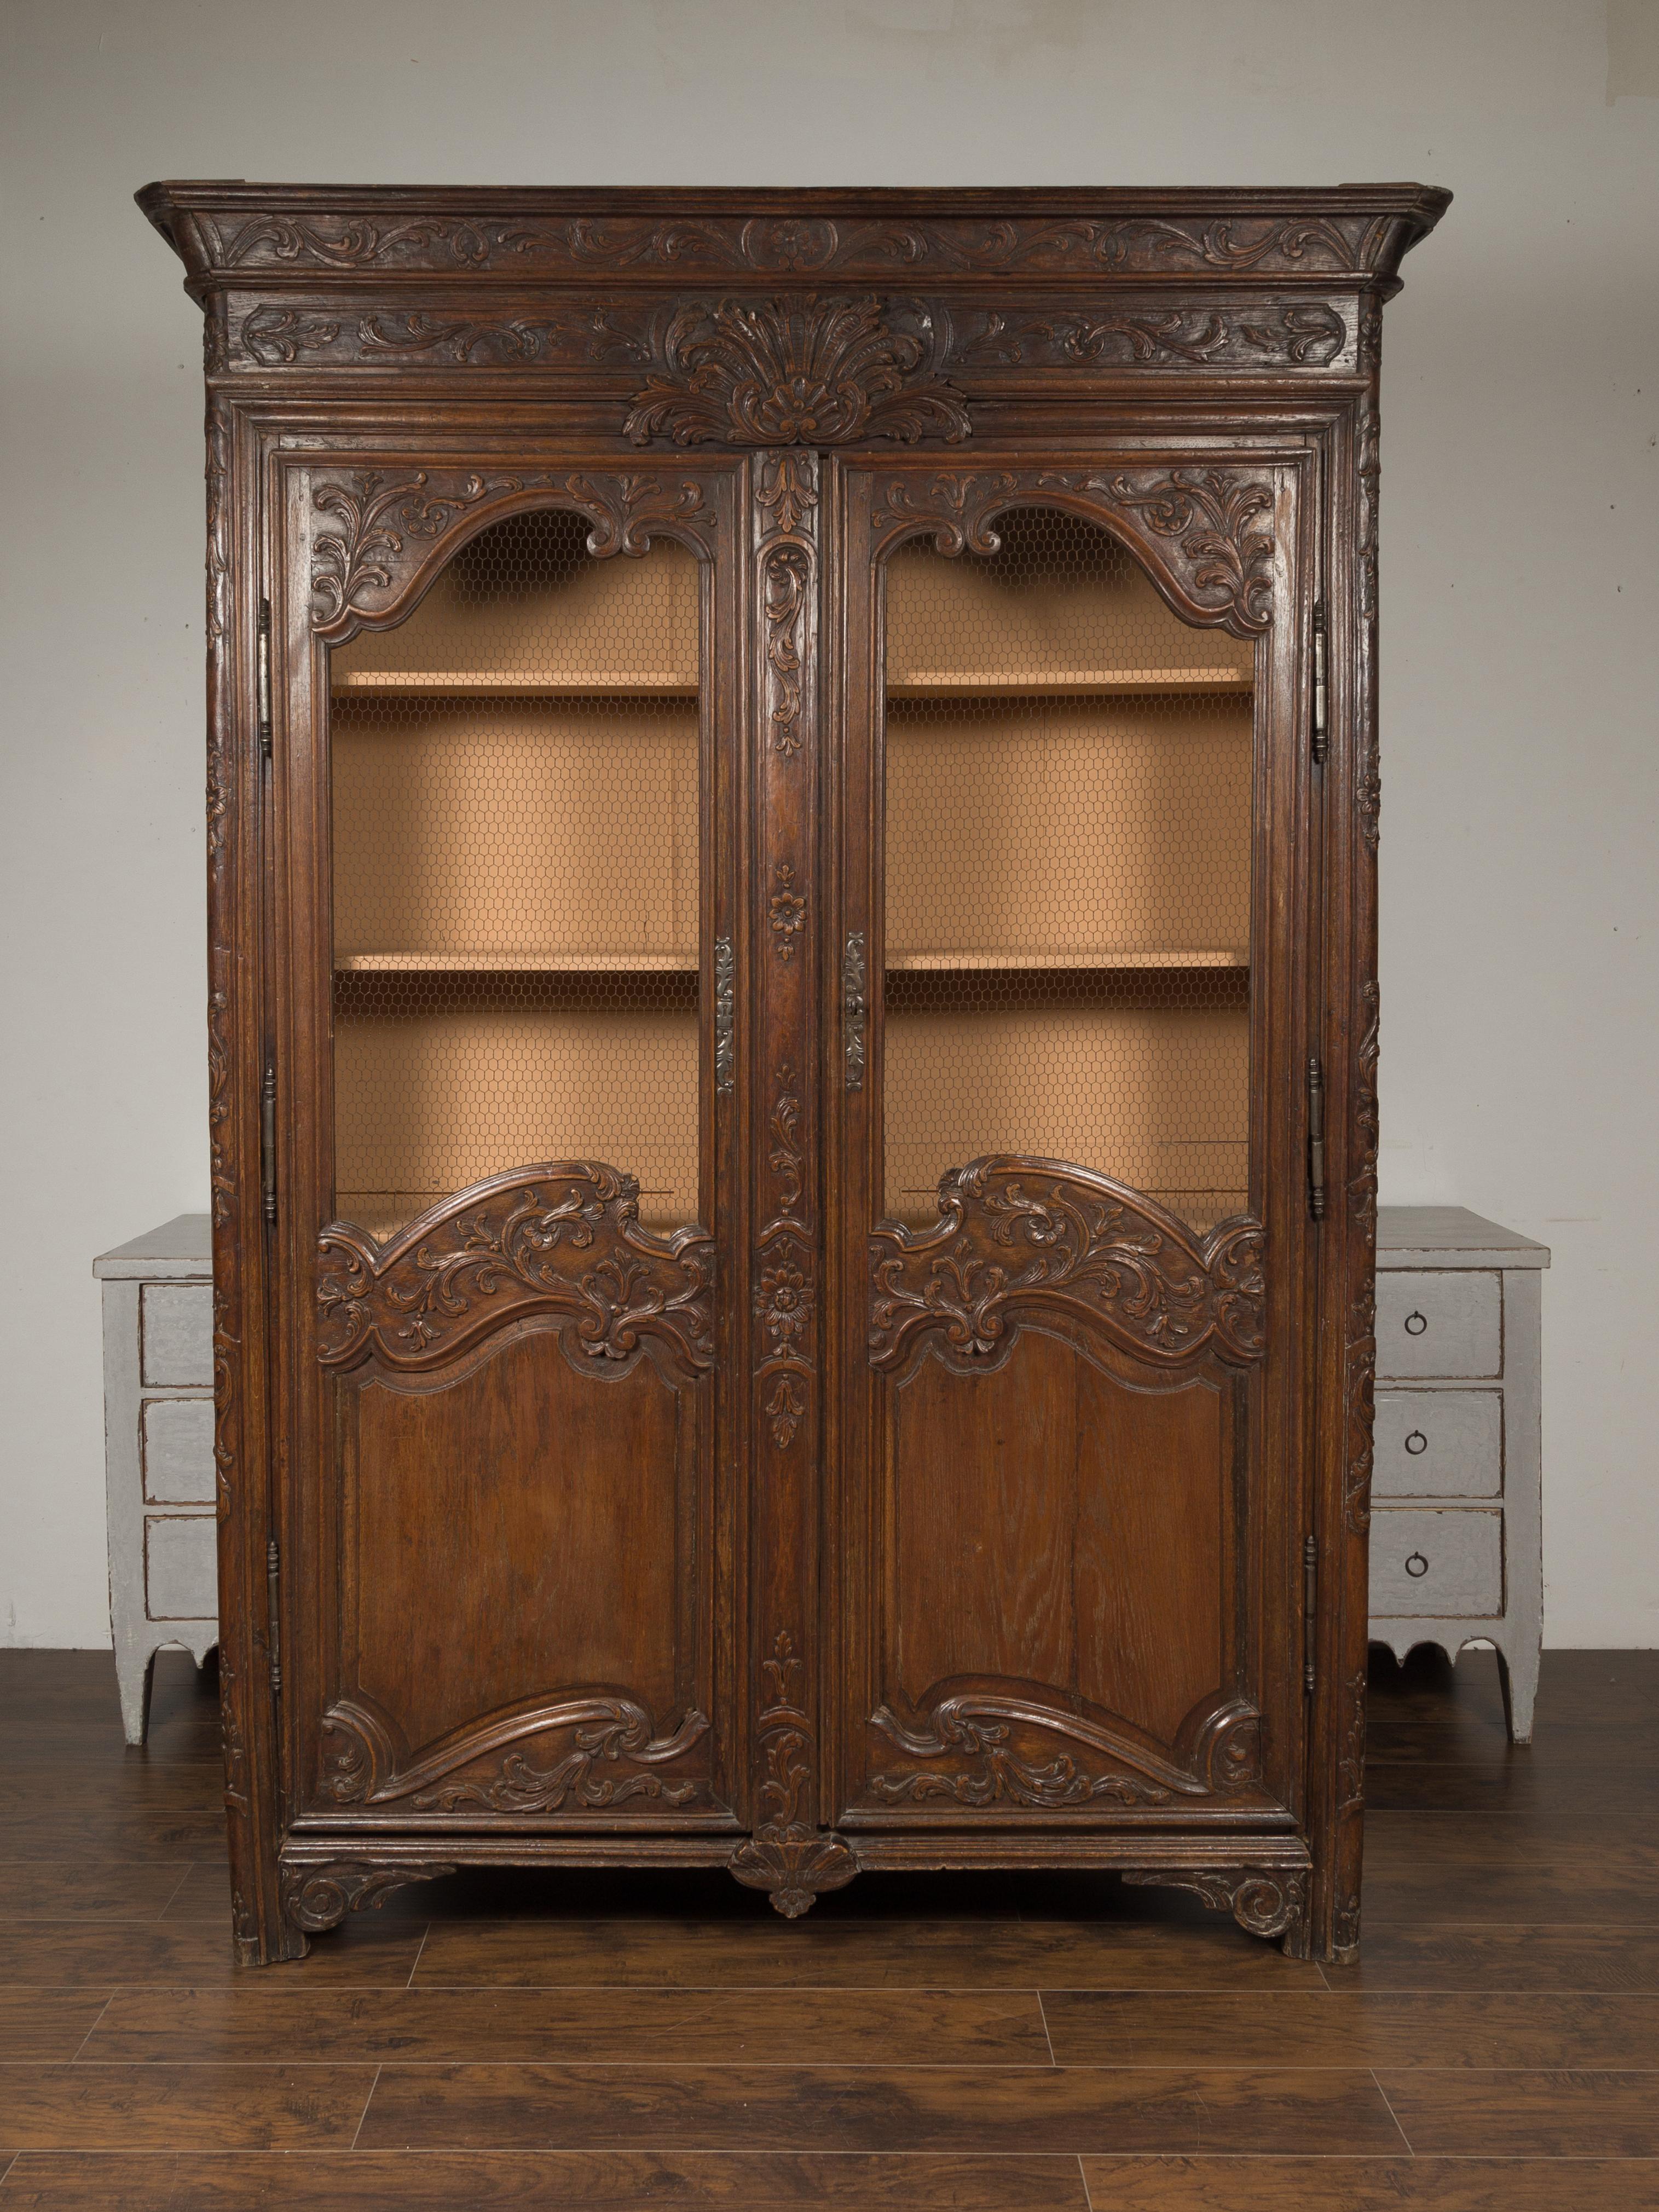 This French 18th century Louis XV narrow wooden bibliothèque (bookcase in French) features two carved doors with chicken wire below a crown molding adorned with a rinceaux frieze and a central carved motif made of a bouquet of acanthus leaves and